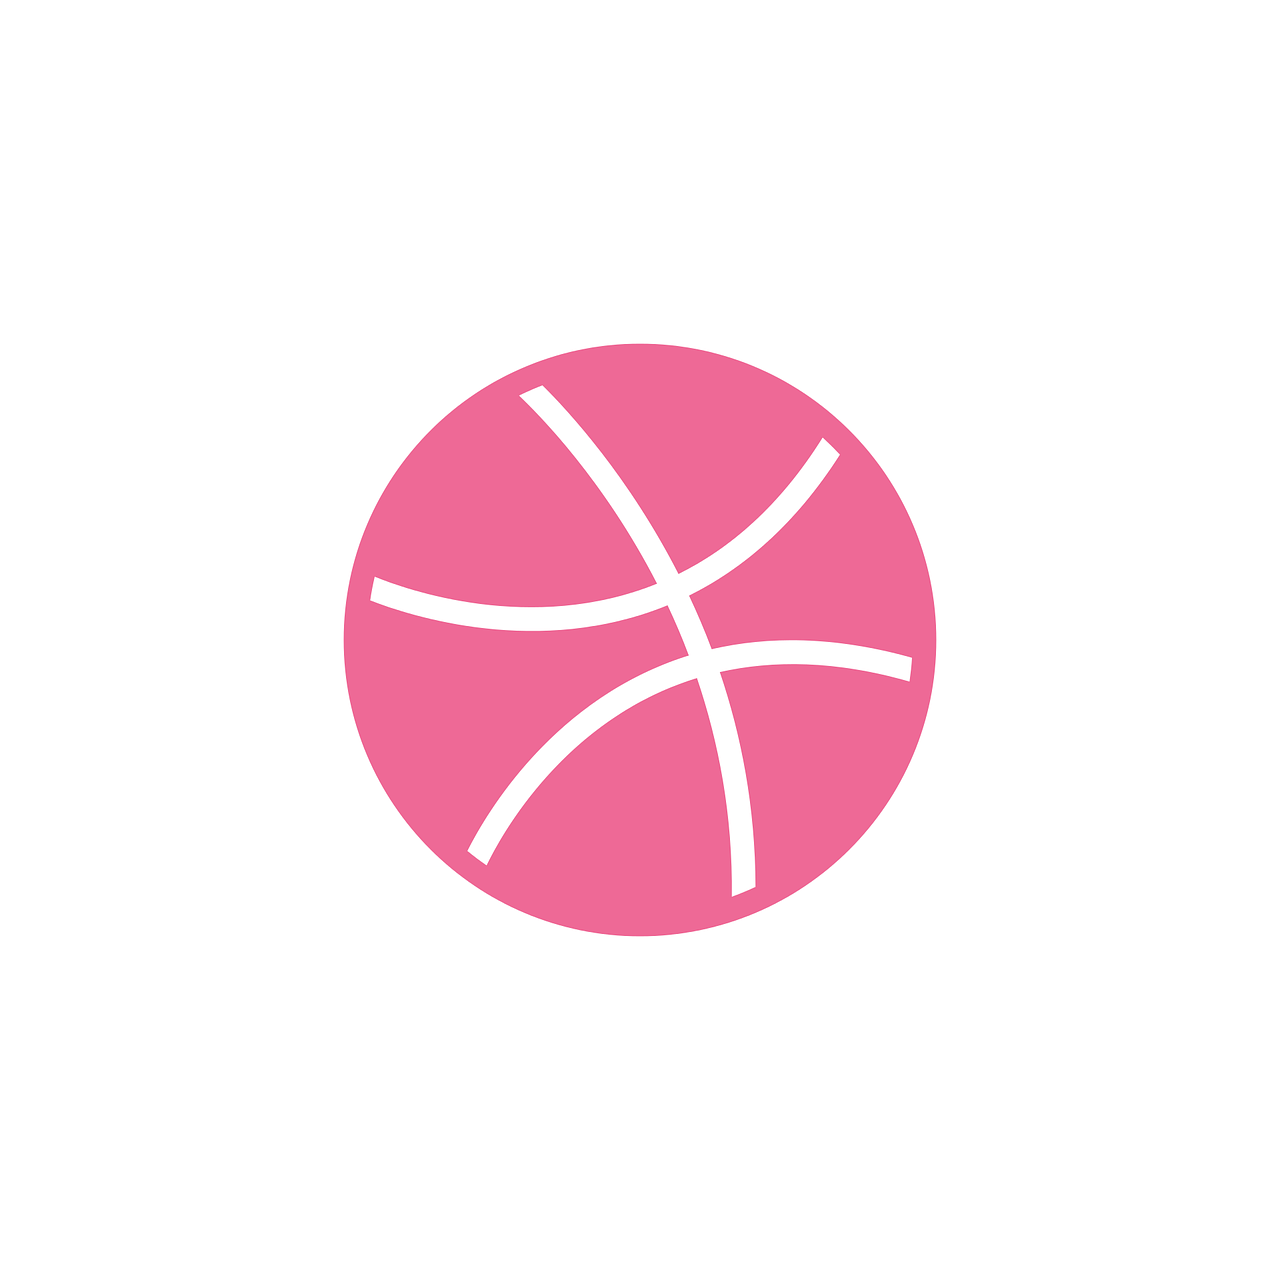 Dribbble Icon   Free Vector Graphic On Pixabay - Dribbble, Transparent background PNG HD thumbnail